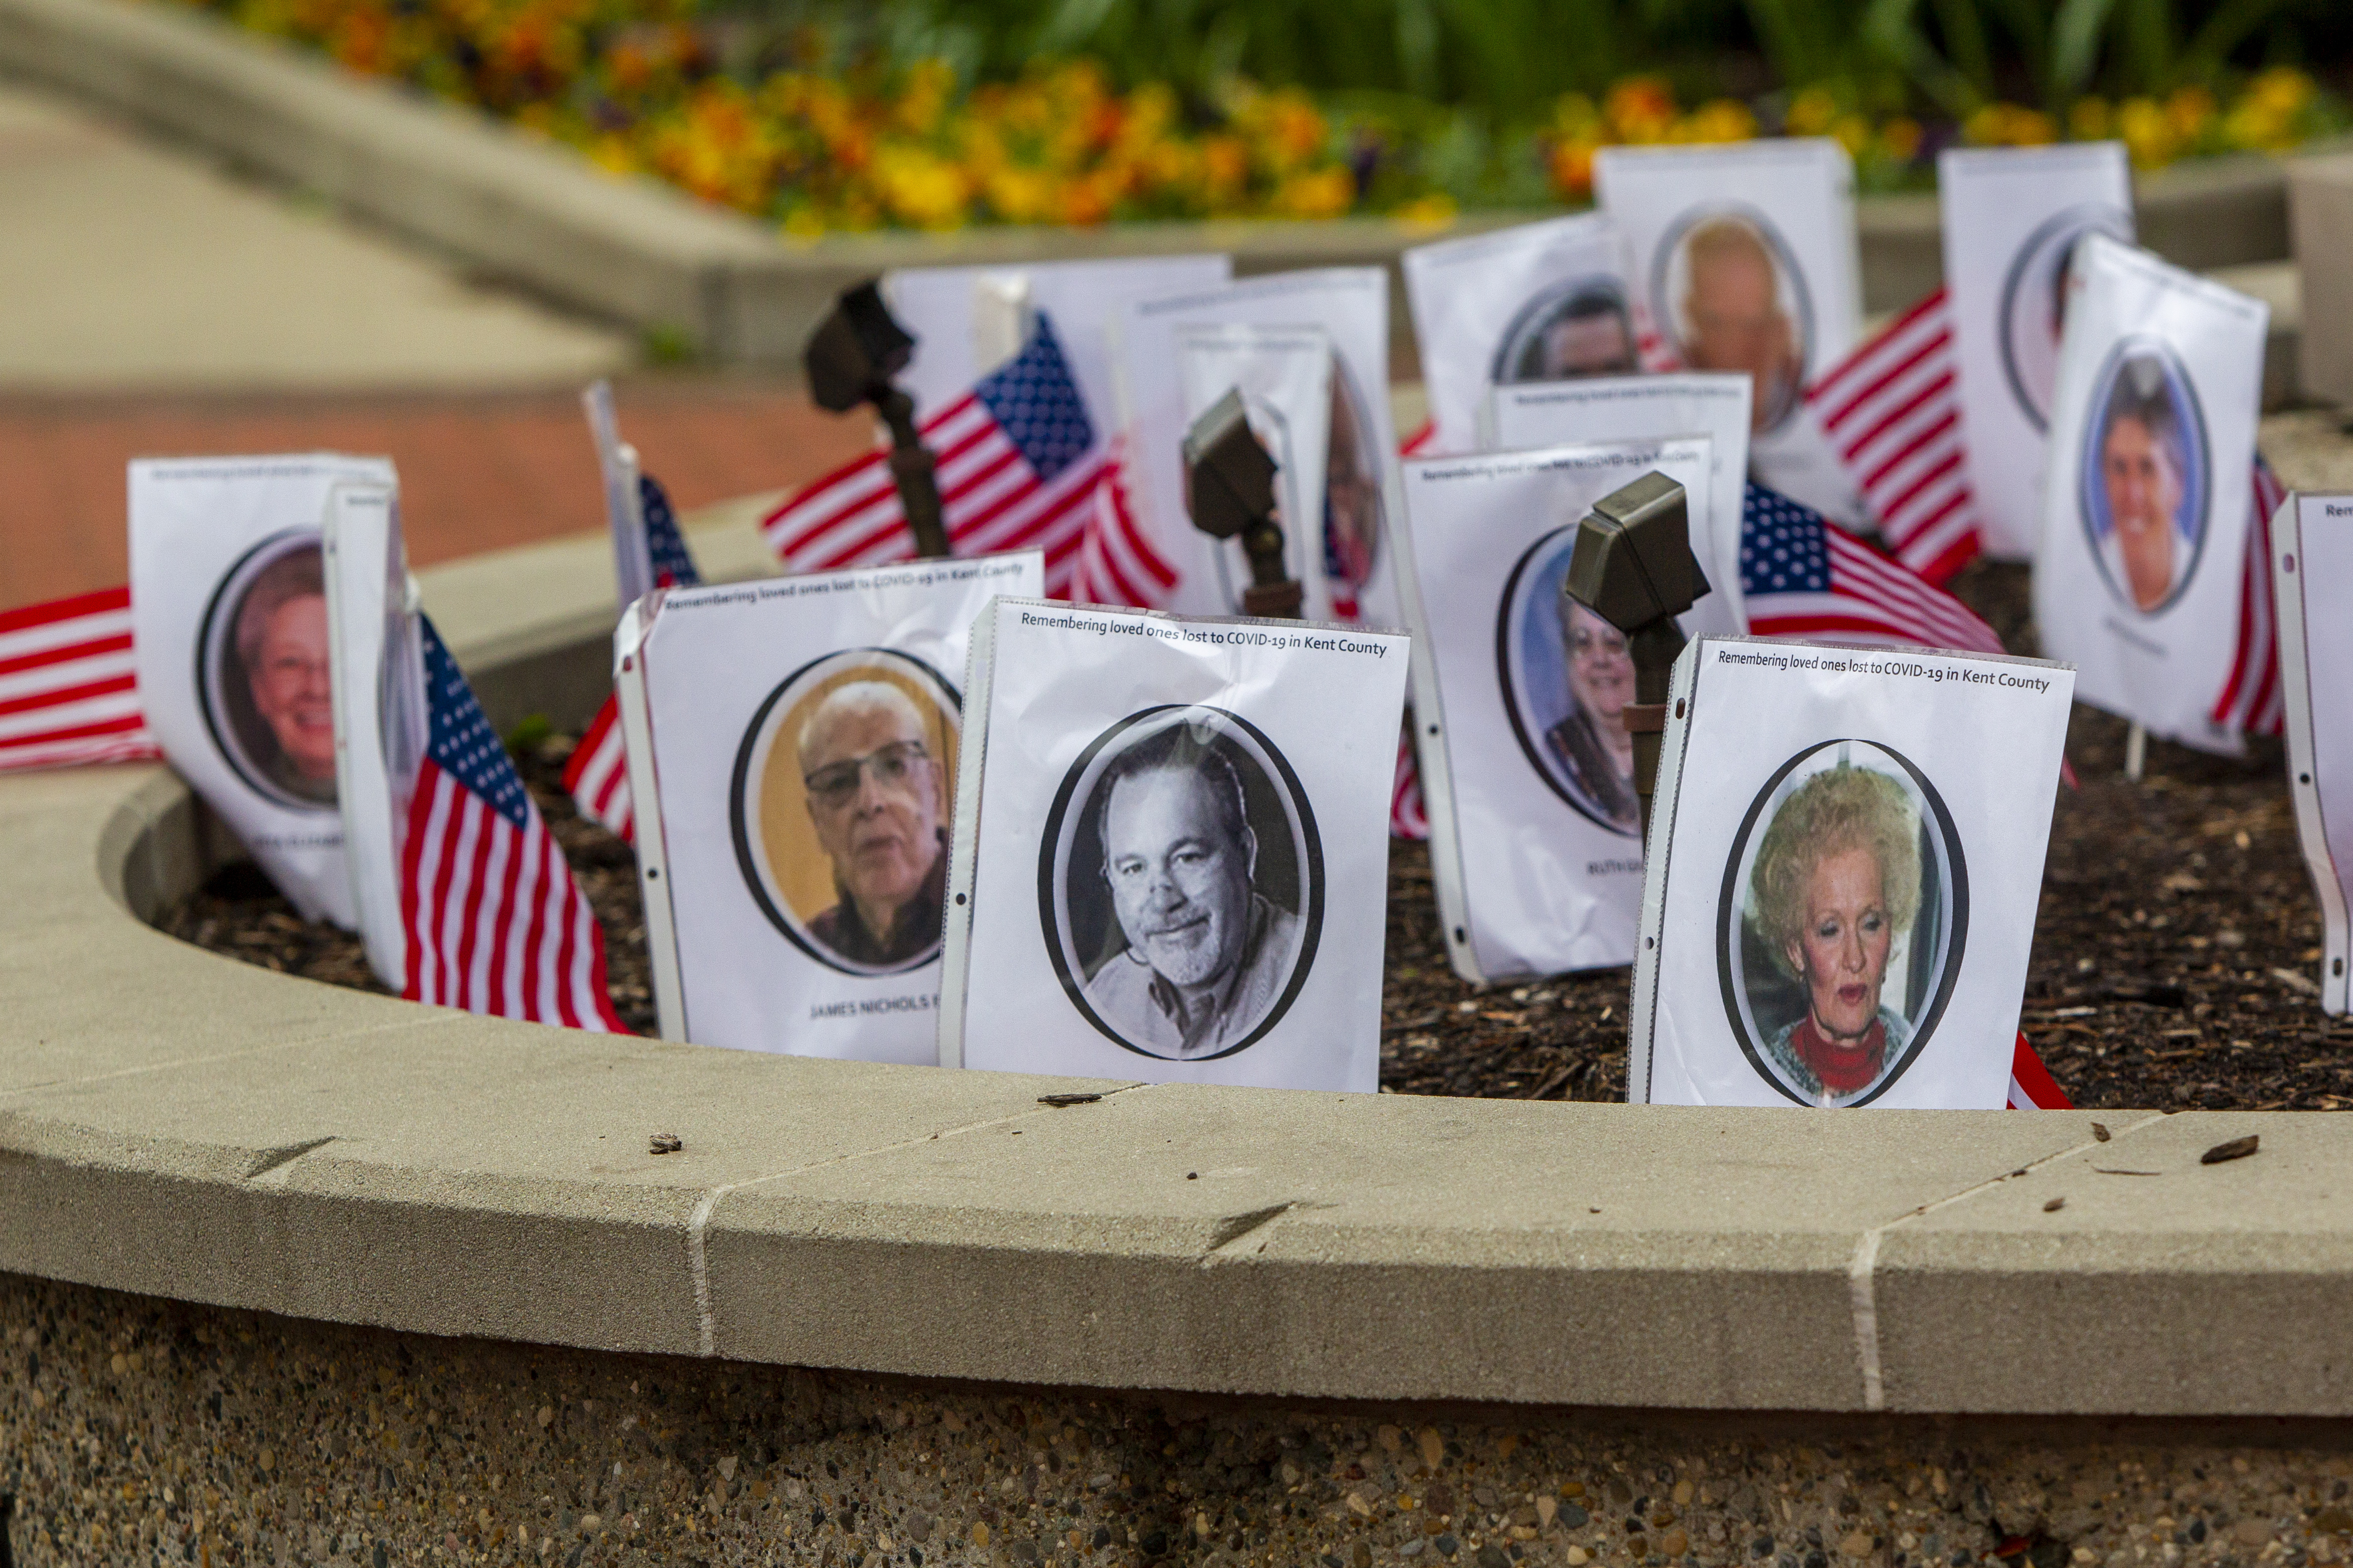 Part of Karen Dunnam's memorial to coronavirus victims set up as a counter-protest across the street from the "American Patriot Rally-Sheriffs speak out" event at Rosa Parks Circle in downtown Grand Rapids on Monday, May 18, 2020. The crowd is protesting against Gov. Gretchen Whitmer's stay-at-home order. (Cory Morse | MLive.com)